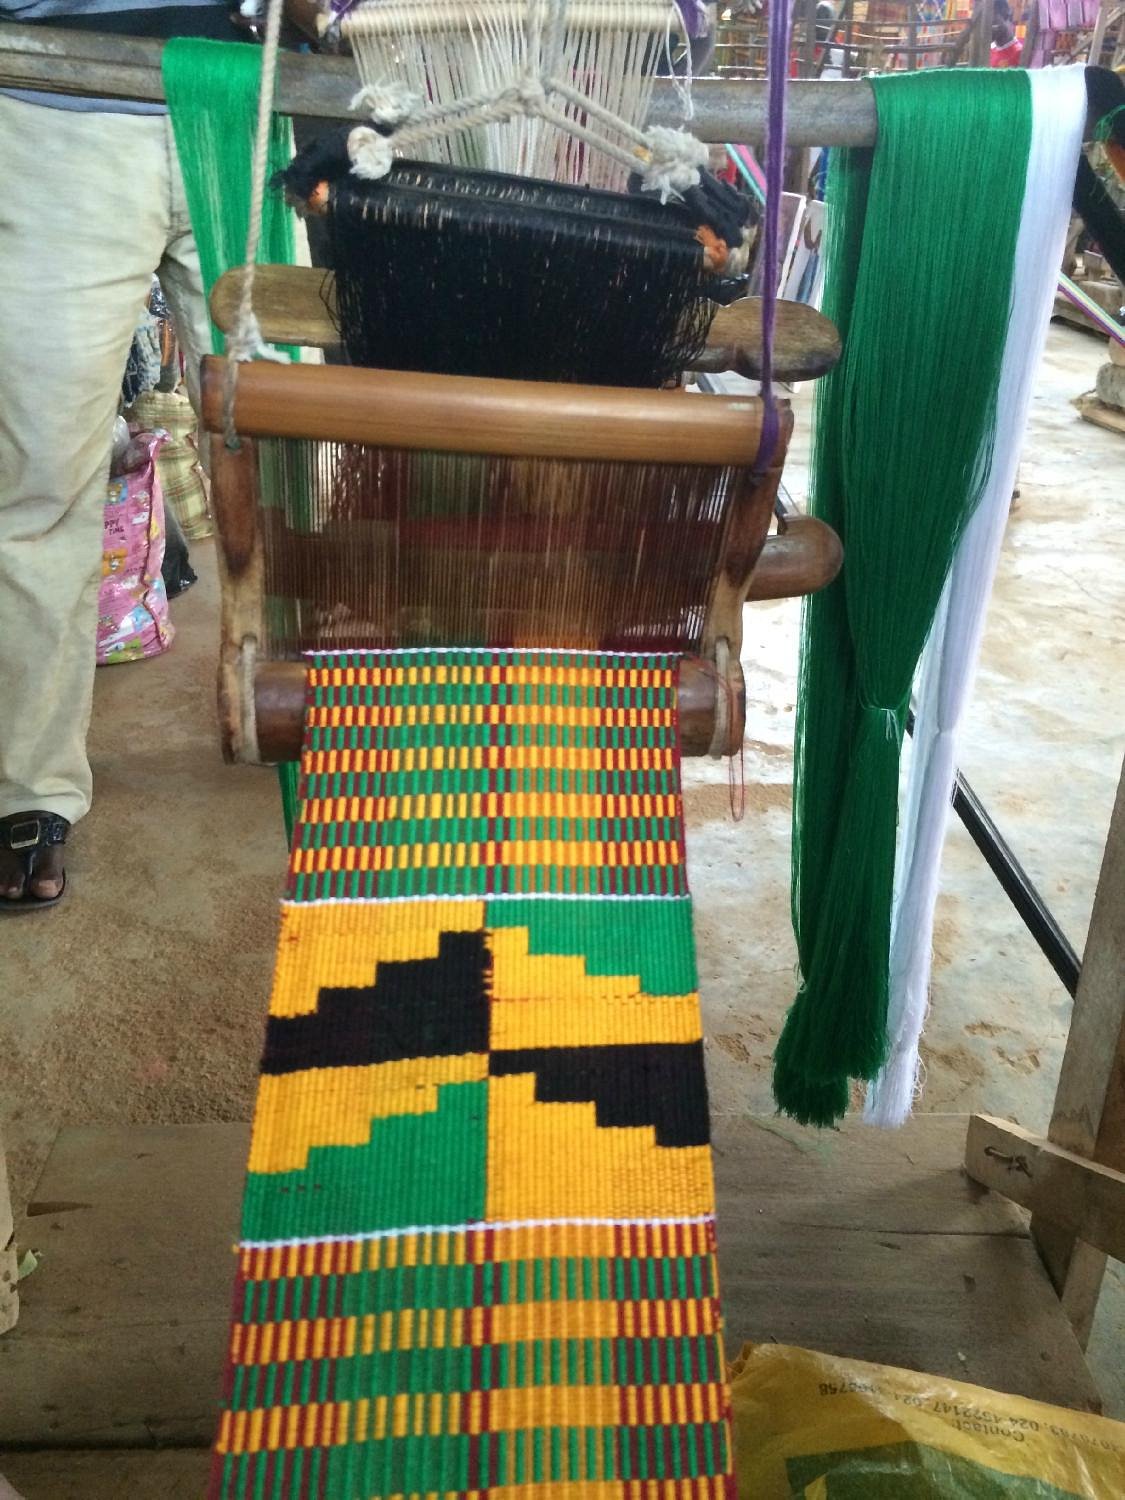 Weaving History: Kente Cloth and Naming Conventions in Ghana